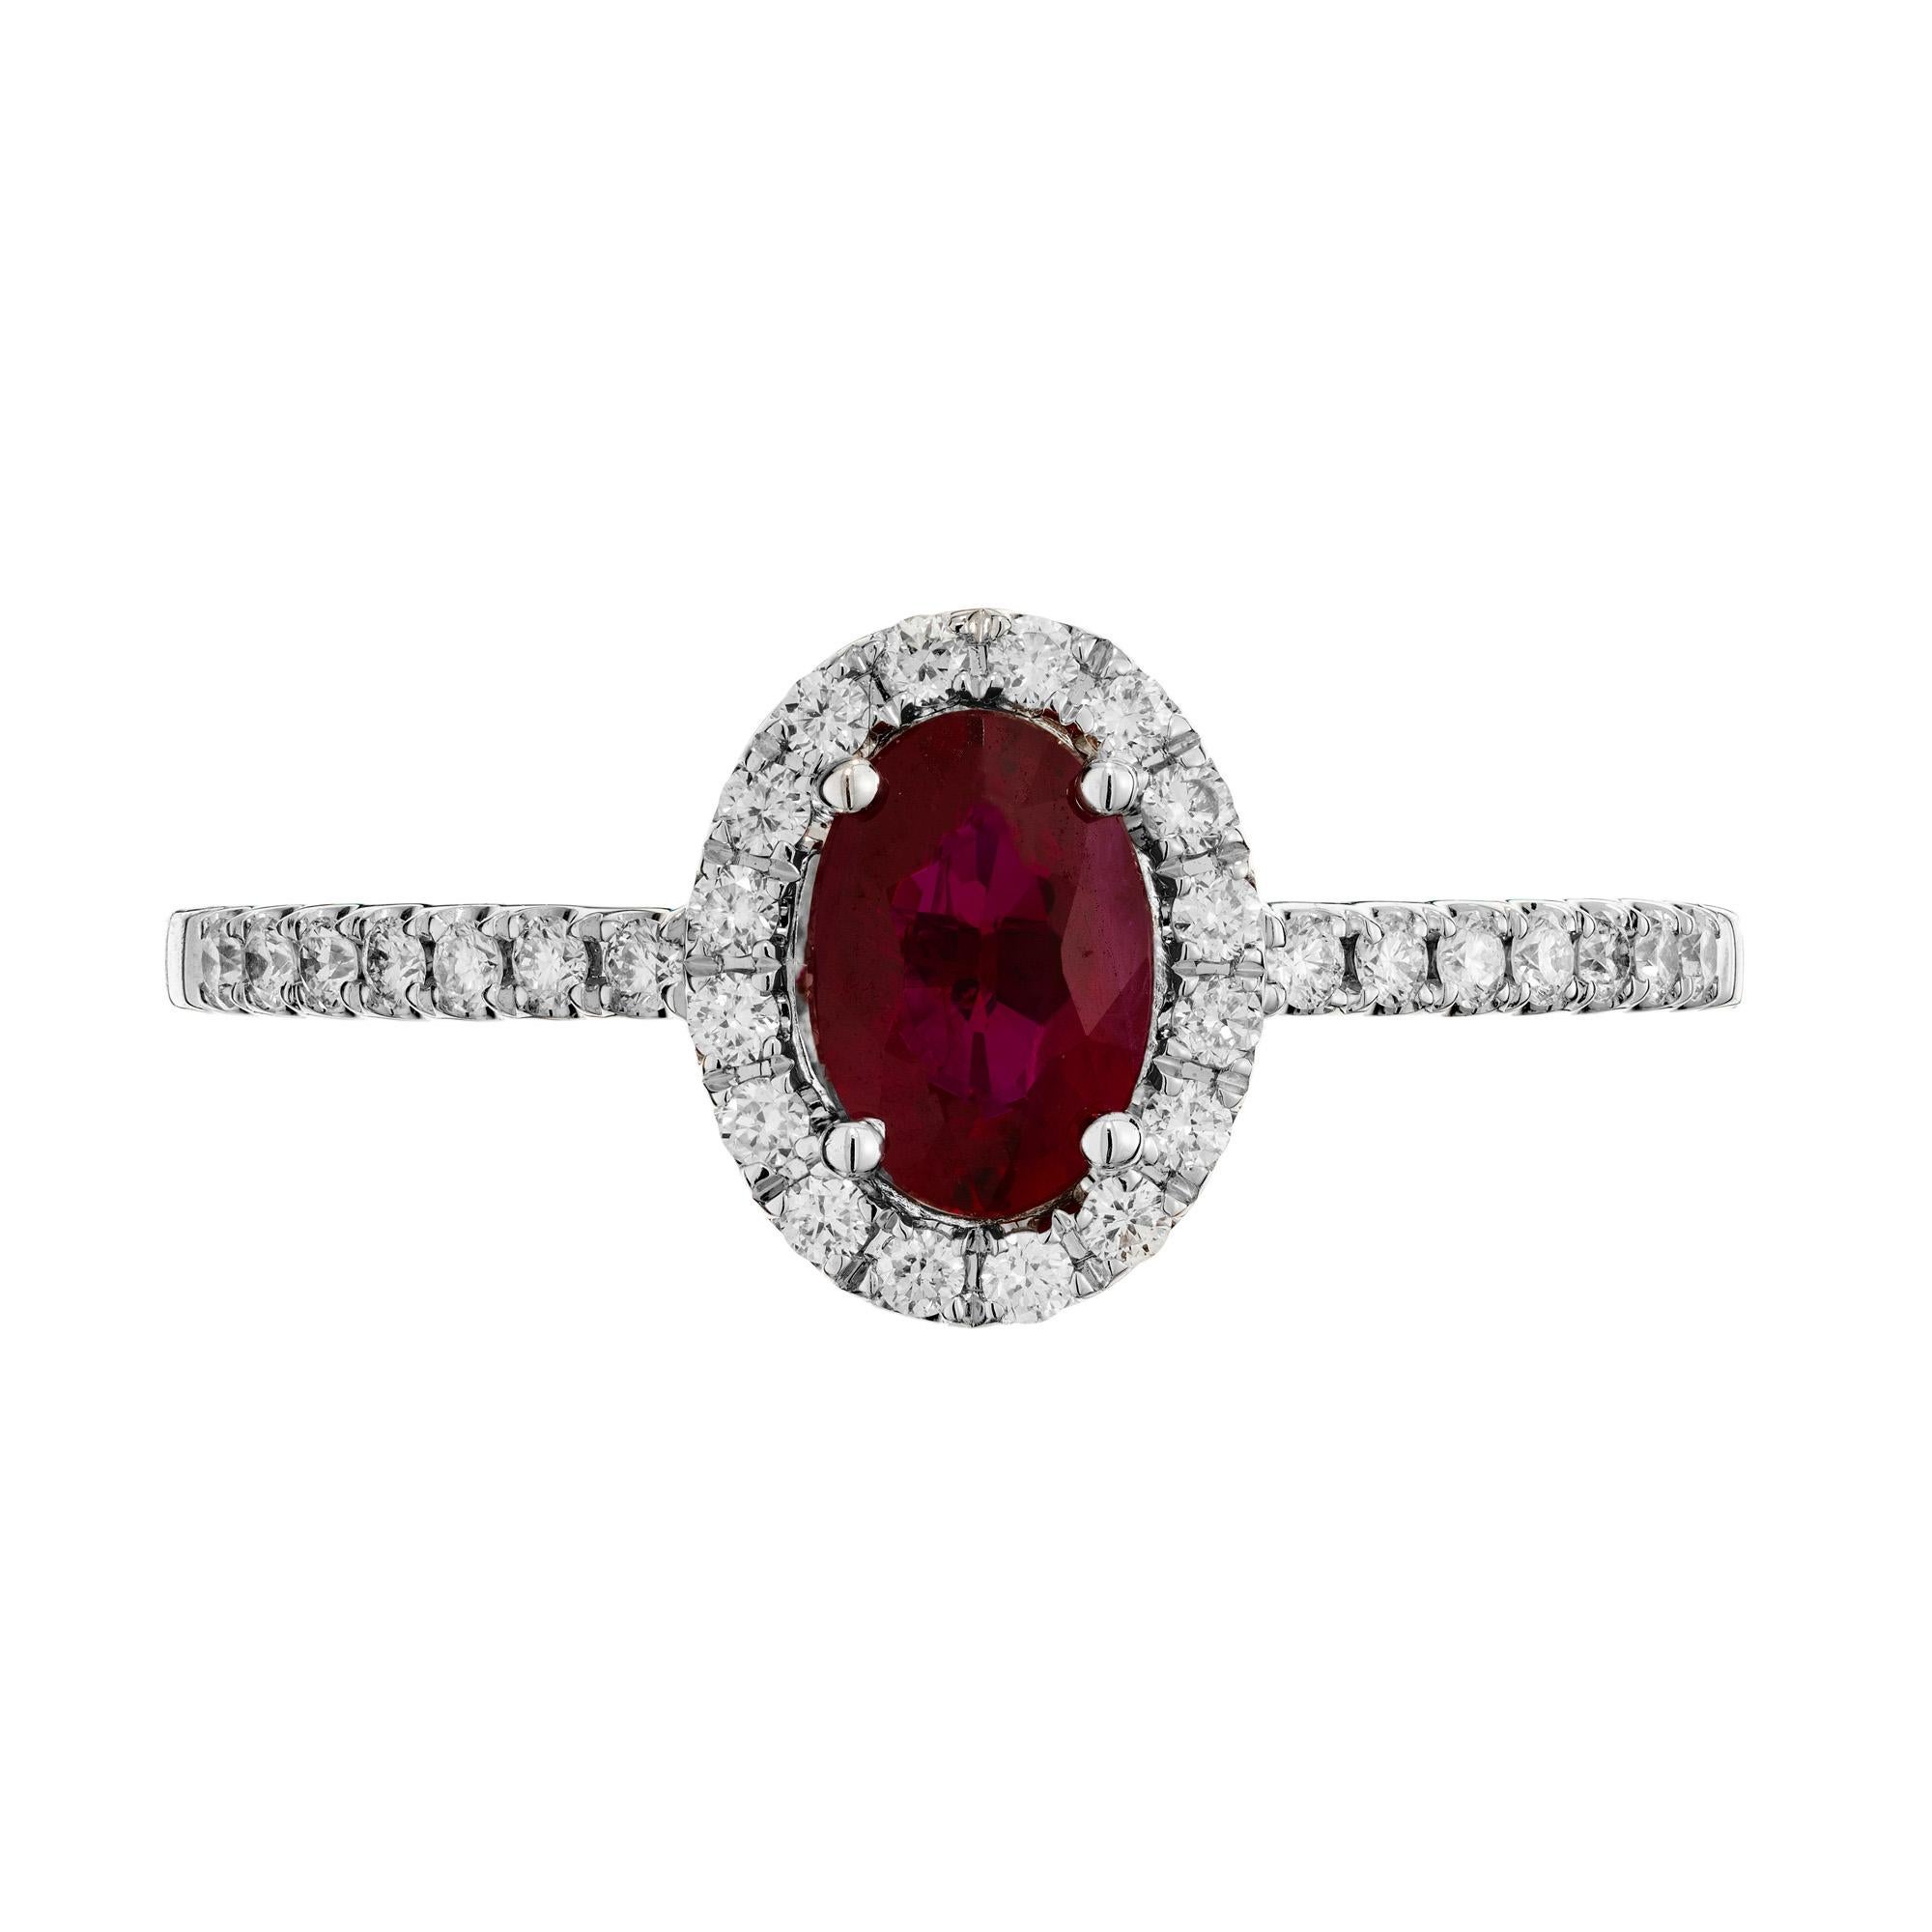 Natural ruby and diamond engagement ring. .60ct oval ruby center stone, mounted in a 14k white gold setting with a halo of round brilliant cut diamonds. Each should is also adorned with 7 round brilliant cut diamonds. The ruby has been cut for